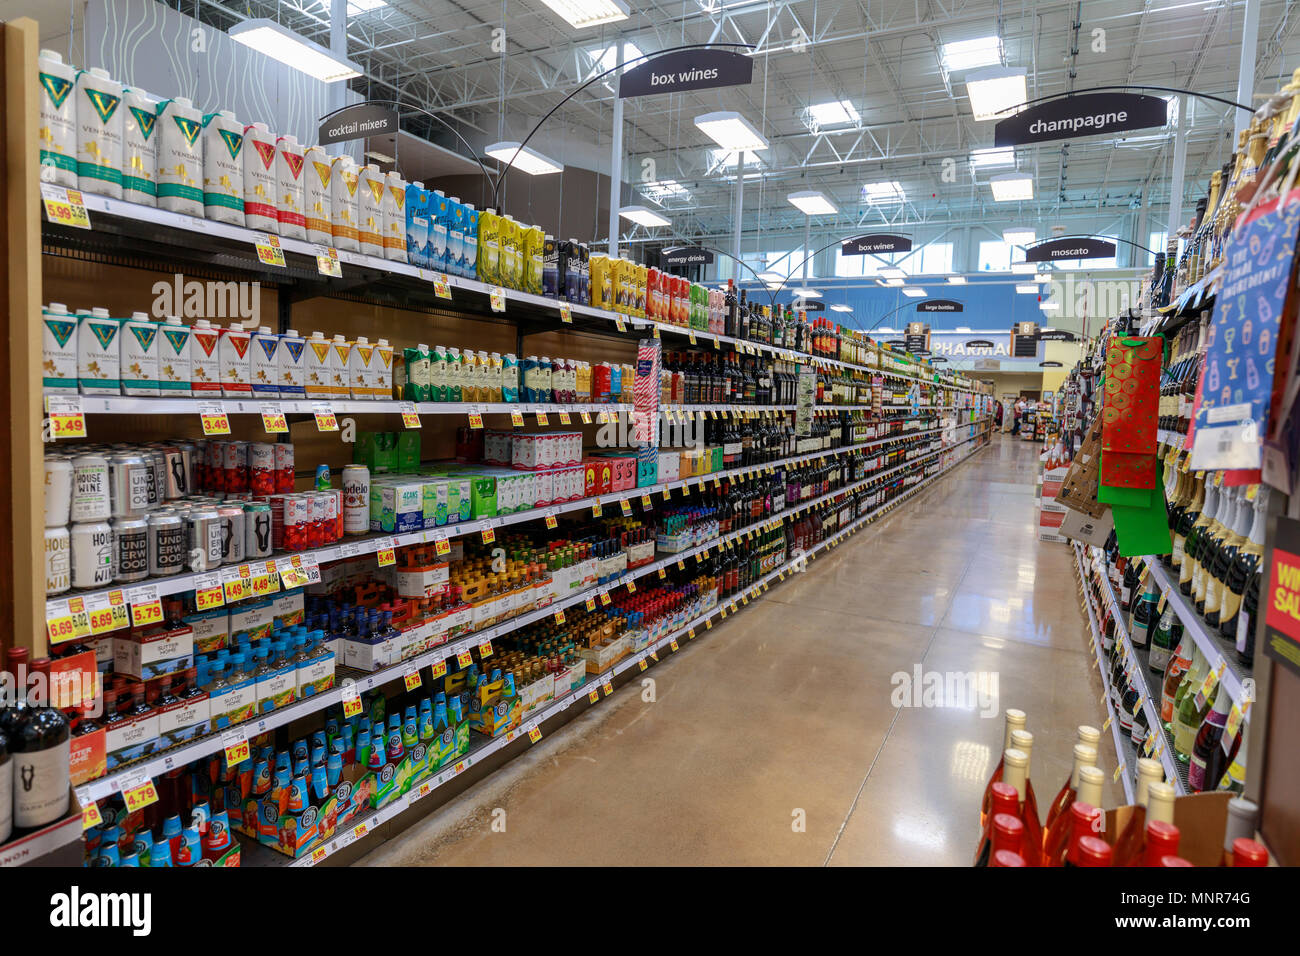 portland-oregon-may-14-2018-aisle-view-of-fred-meyer-inc-is-a